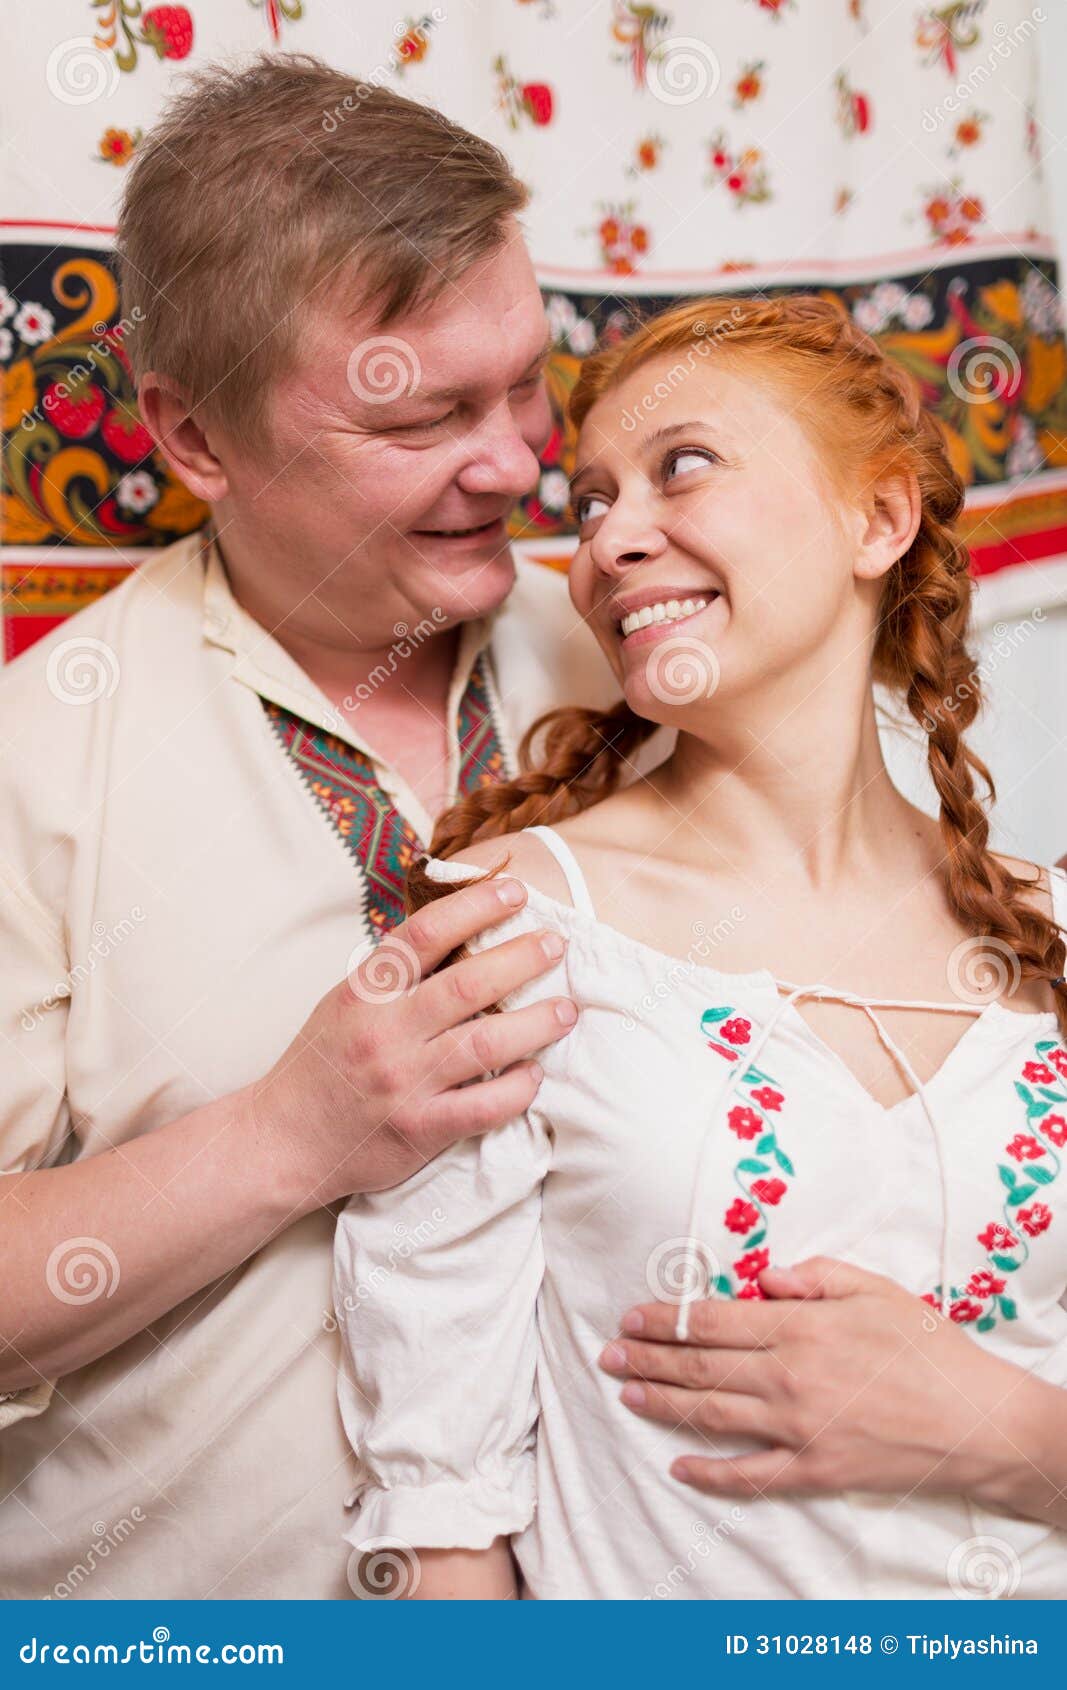 https://thumbs.dreamstime.com/z/russian-couple-national-costume-near-stove-31028148.jpg